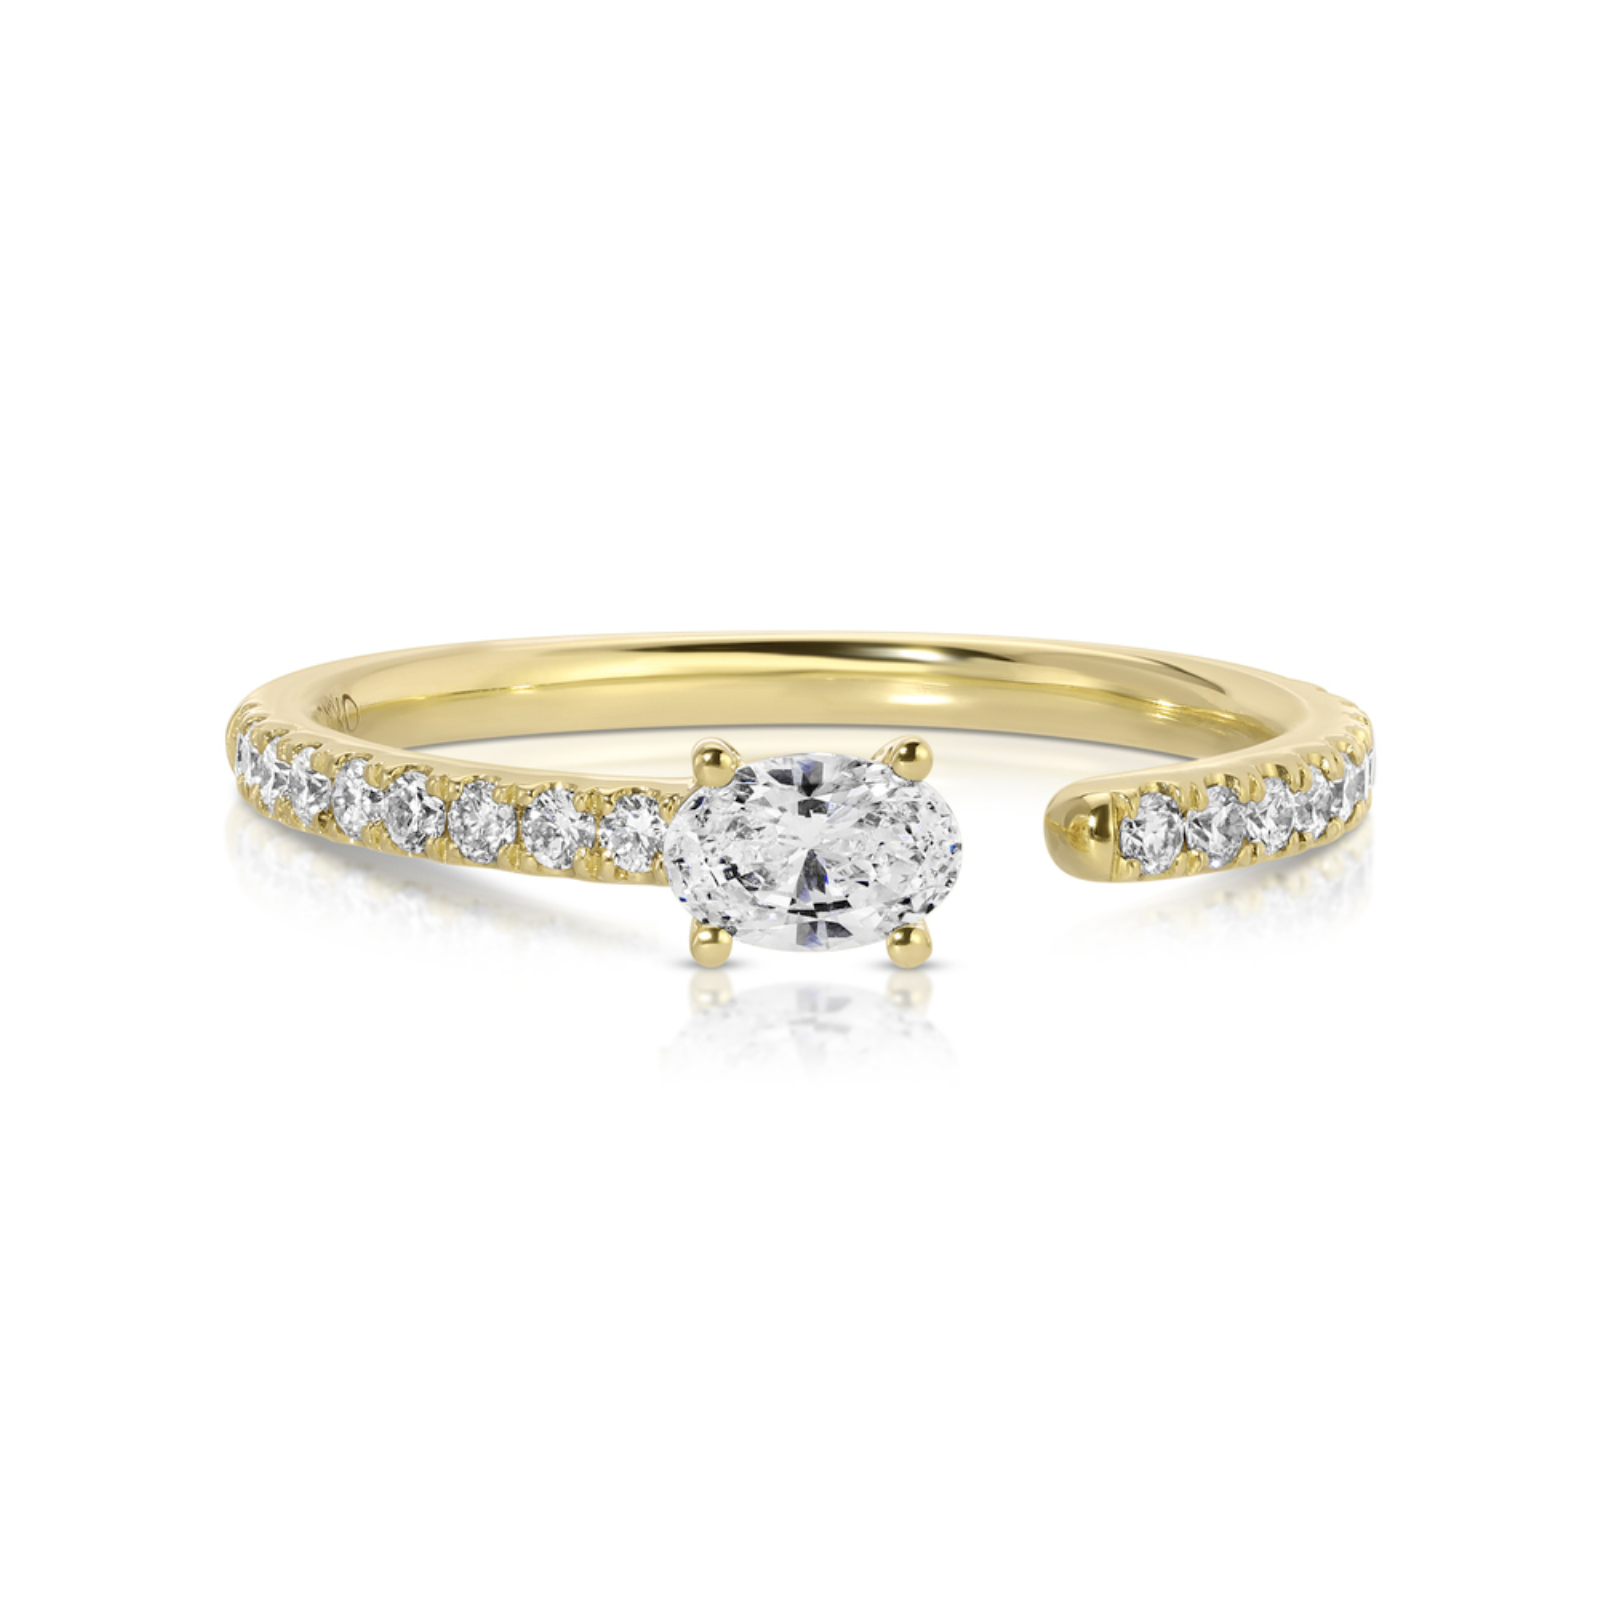 OVAL DIAMOND PAVE BAND SATURN RING